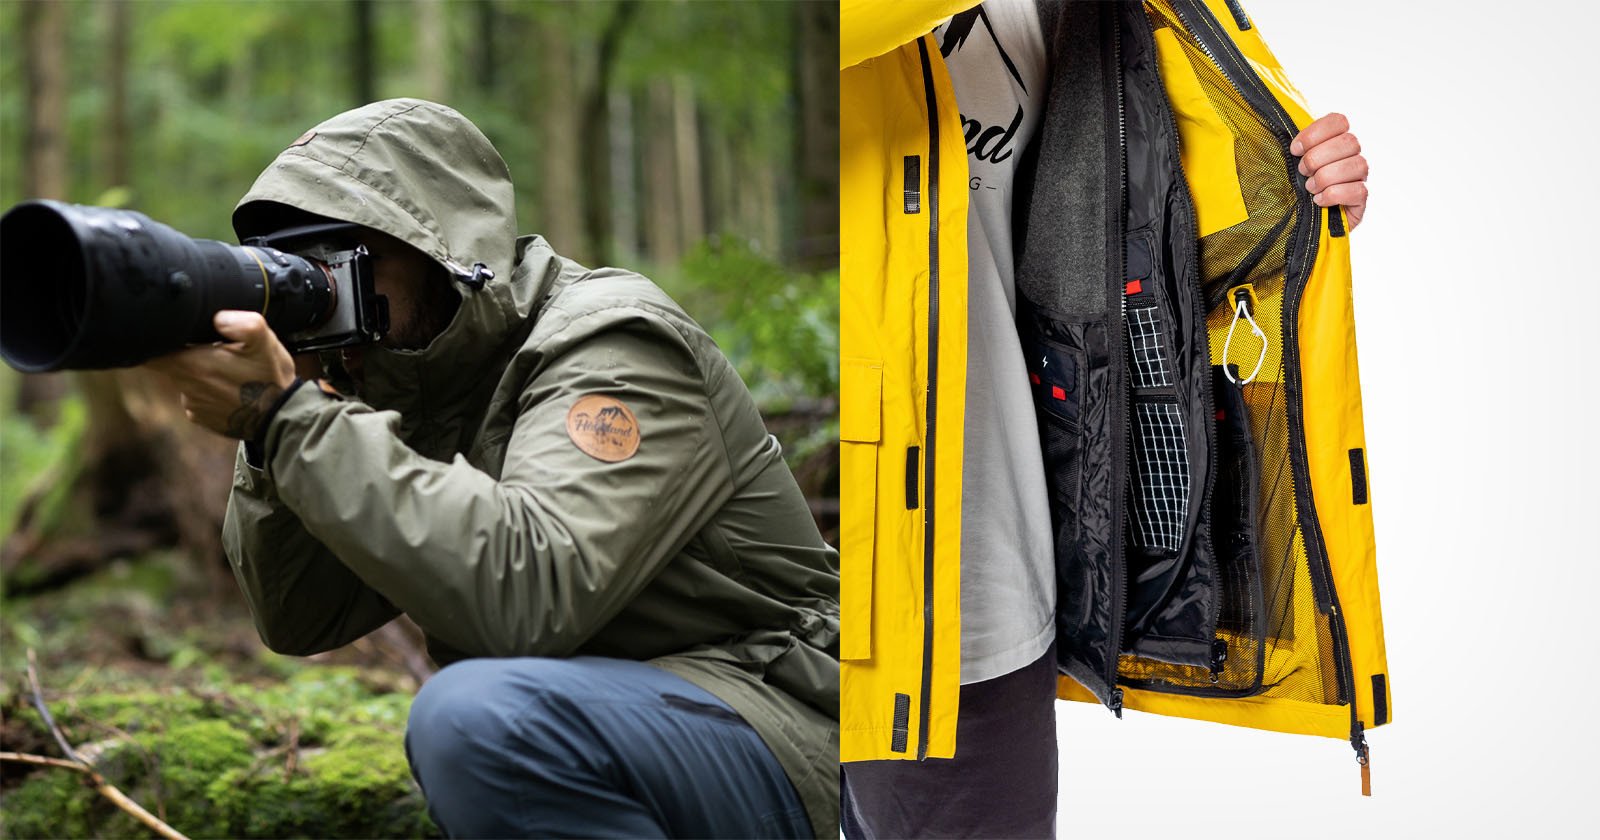  haukland 7in1 jacket made specifically photographers 